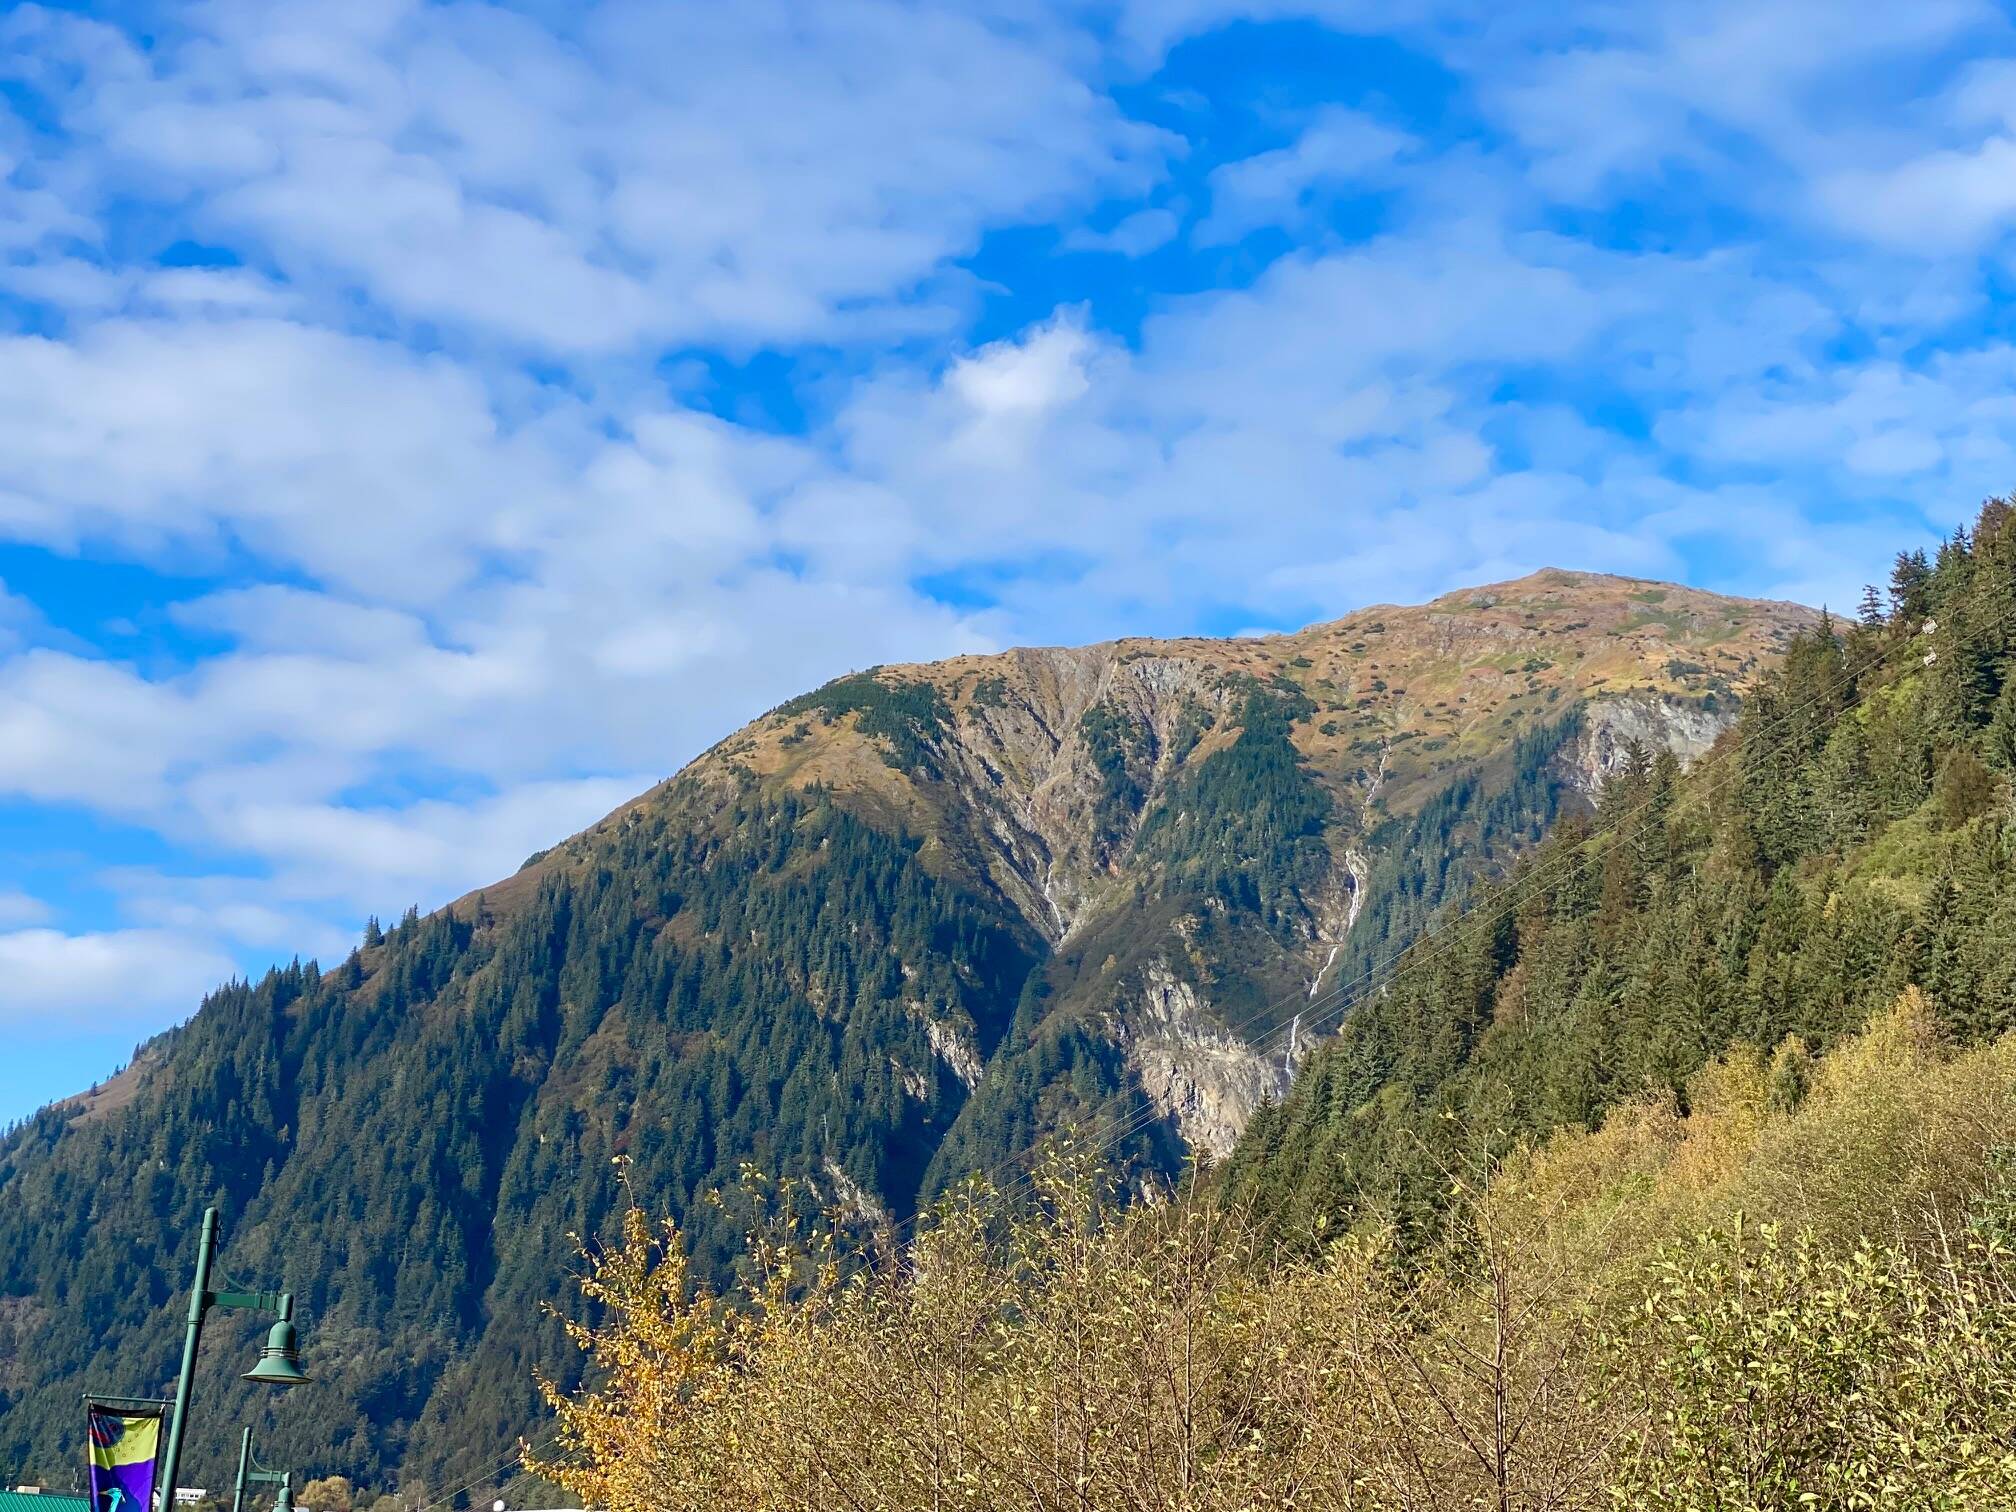 “Ahhh… Remembering Juneau with blue skies.” writes Denise Carroll of this Oct. 2 photo. (Courtesy Photo / Denise Carroll)